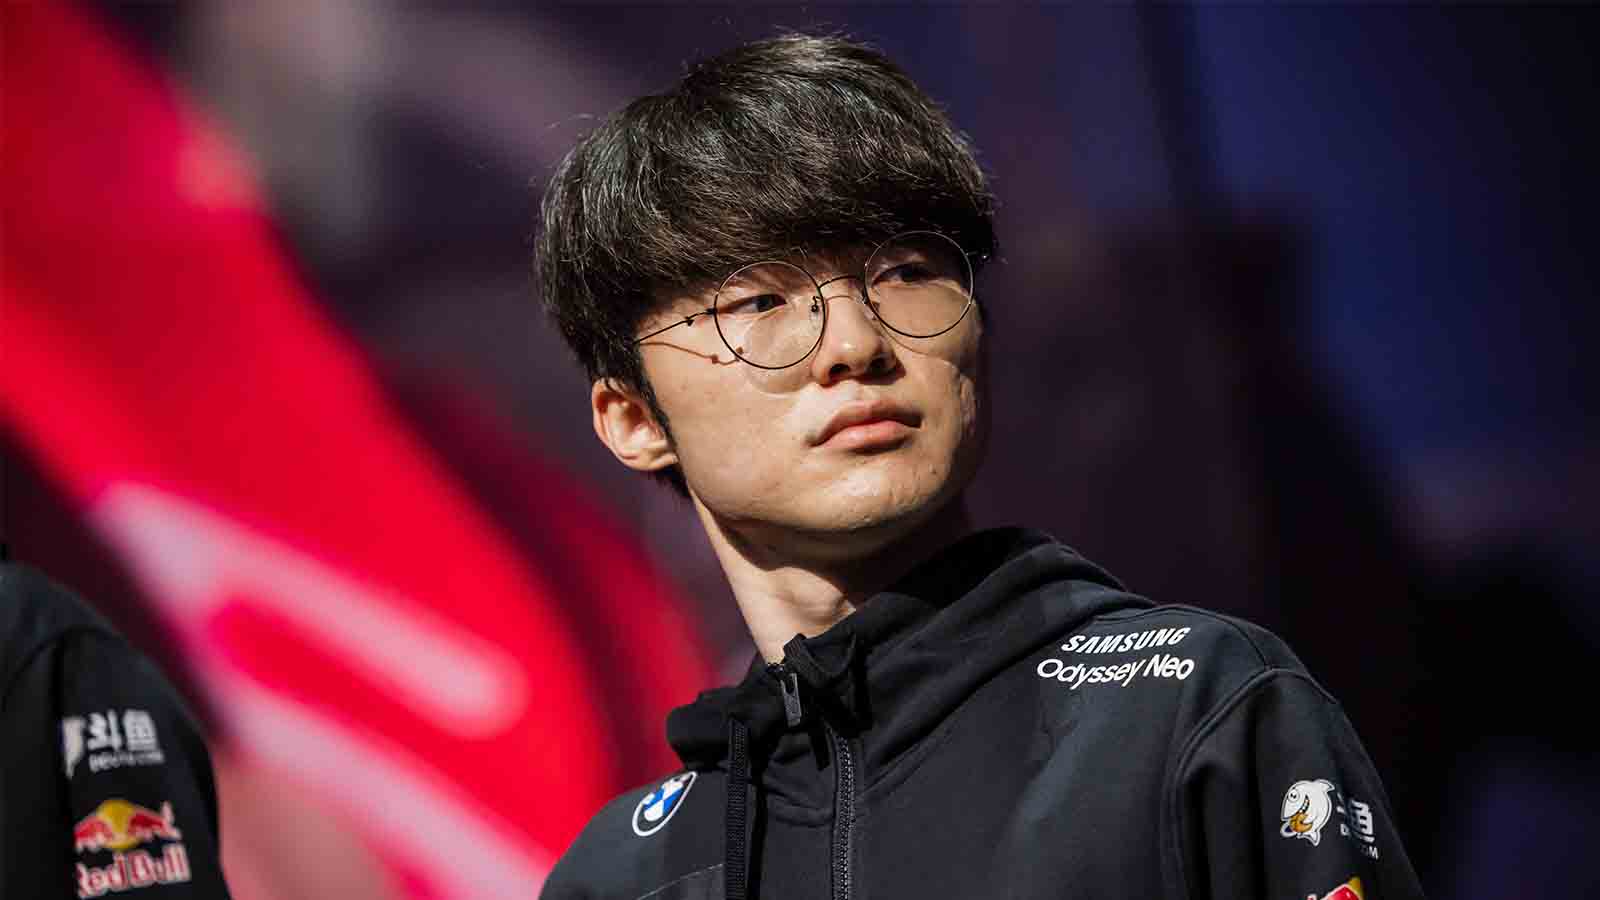 Faker Considers Competing in LCS, Negotiations Underway